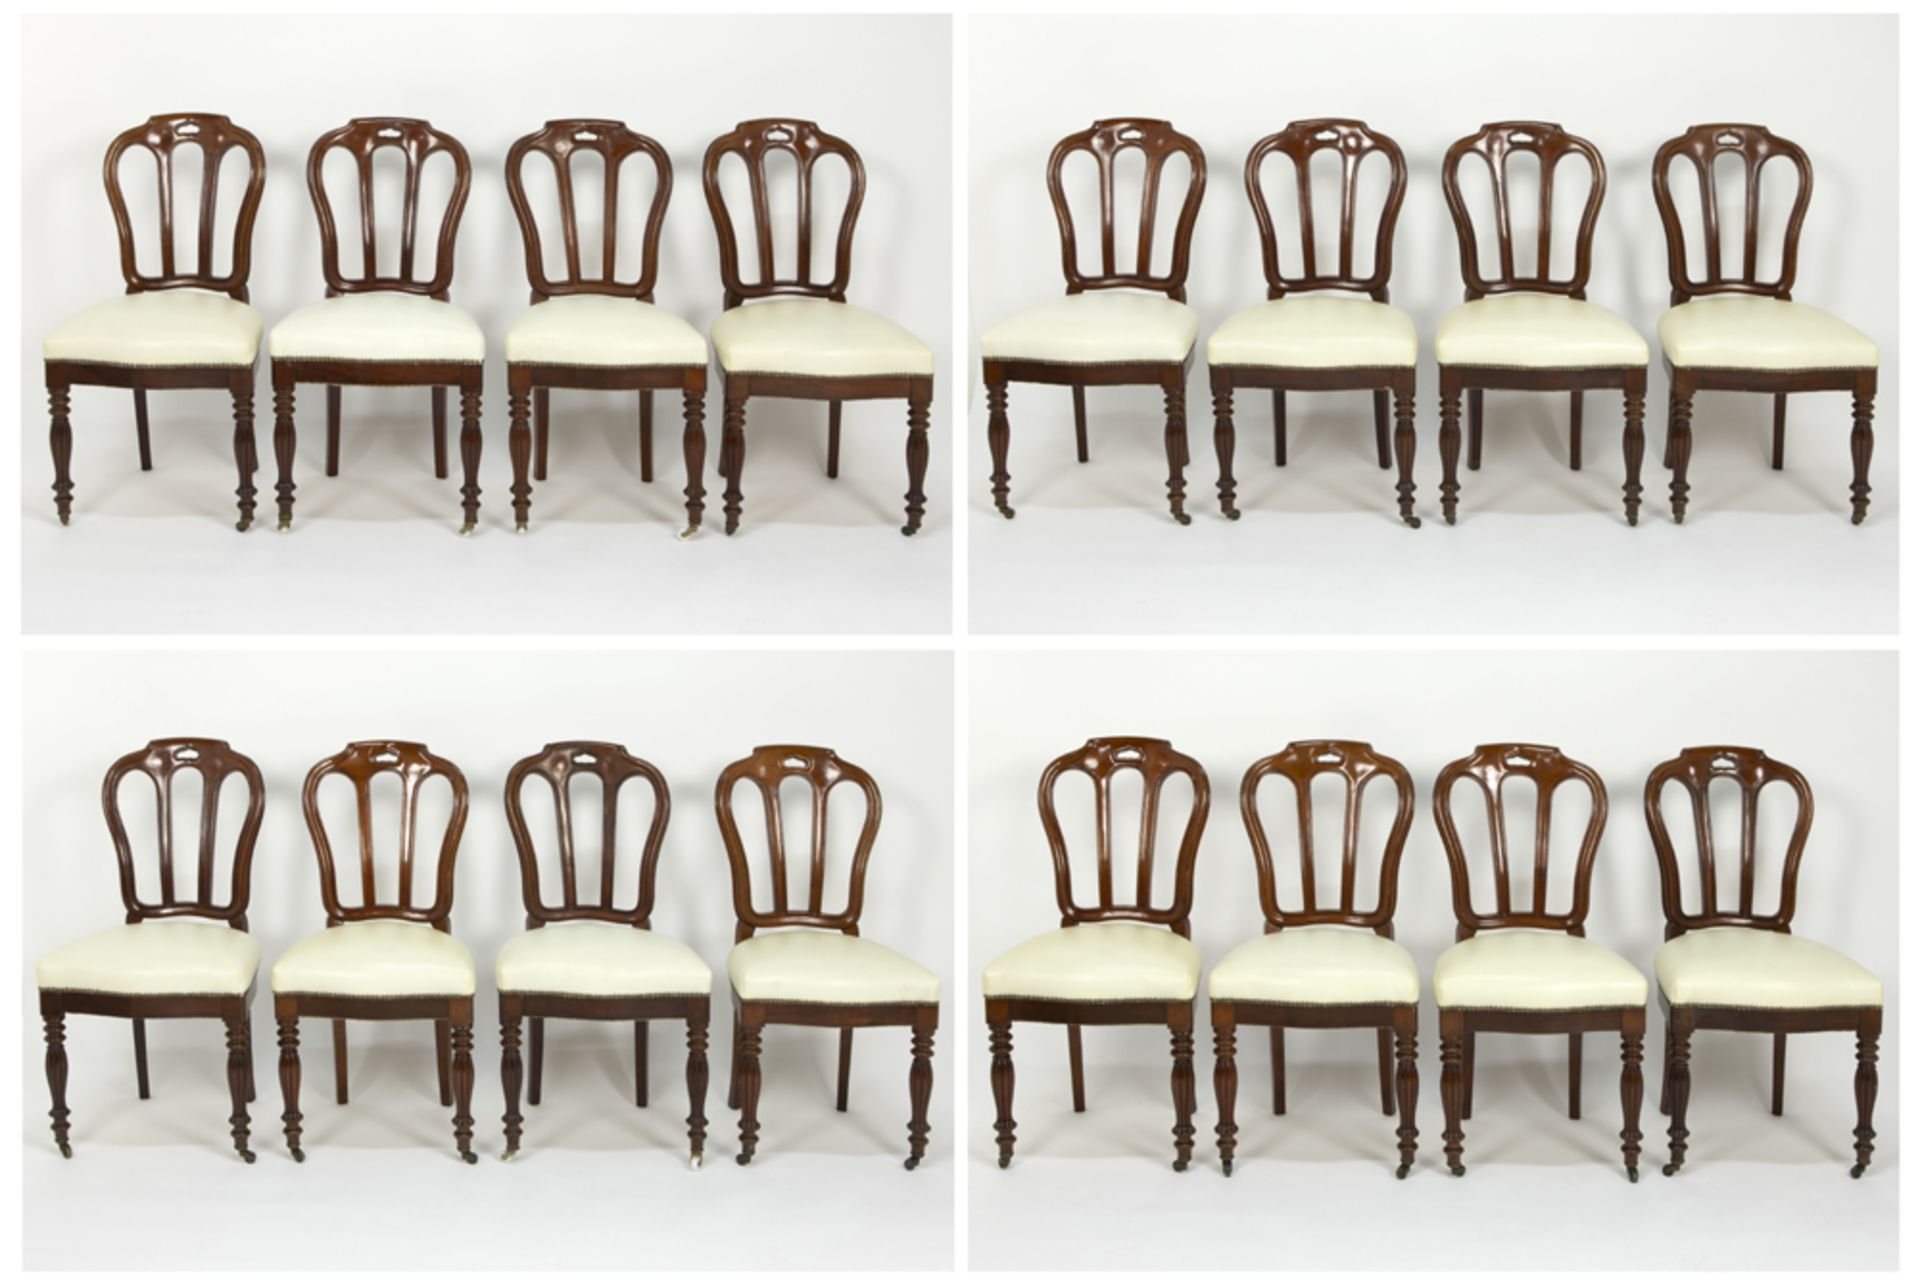 rare series of sixteen 19th Cent. chairs with an elegant design in mahogany - all completely